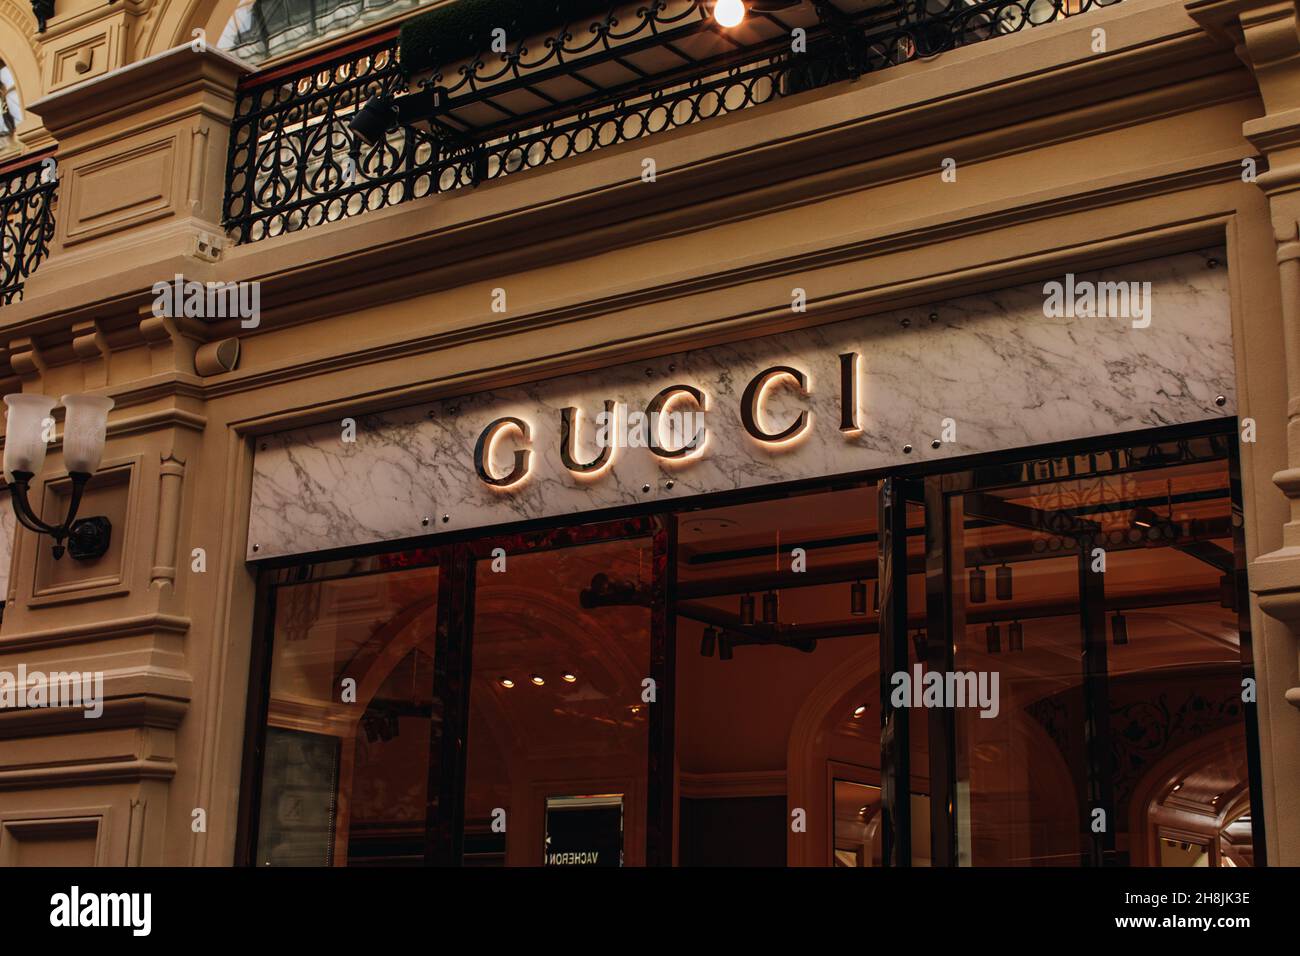 Logo and texture gucci luxury. The image represents a background